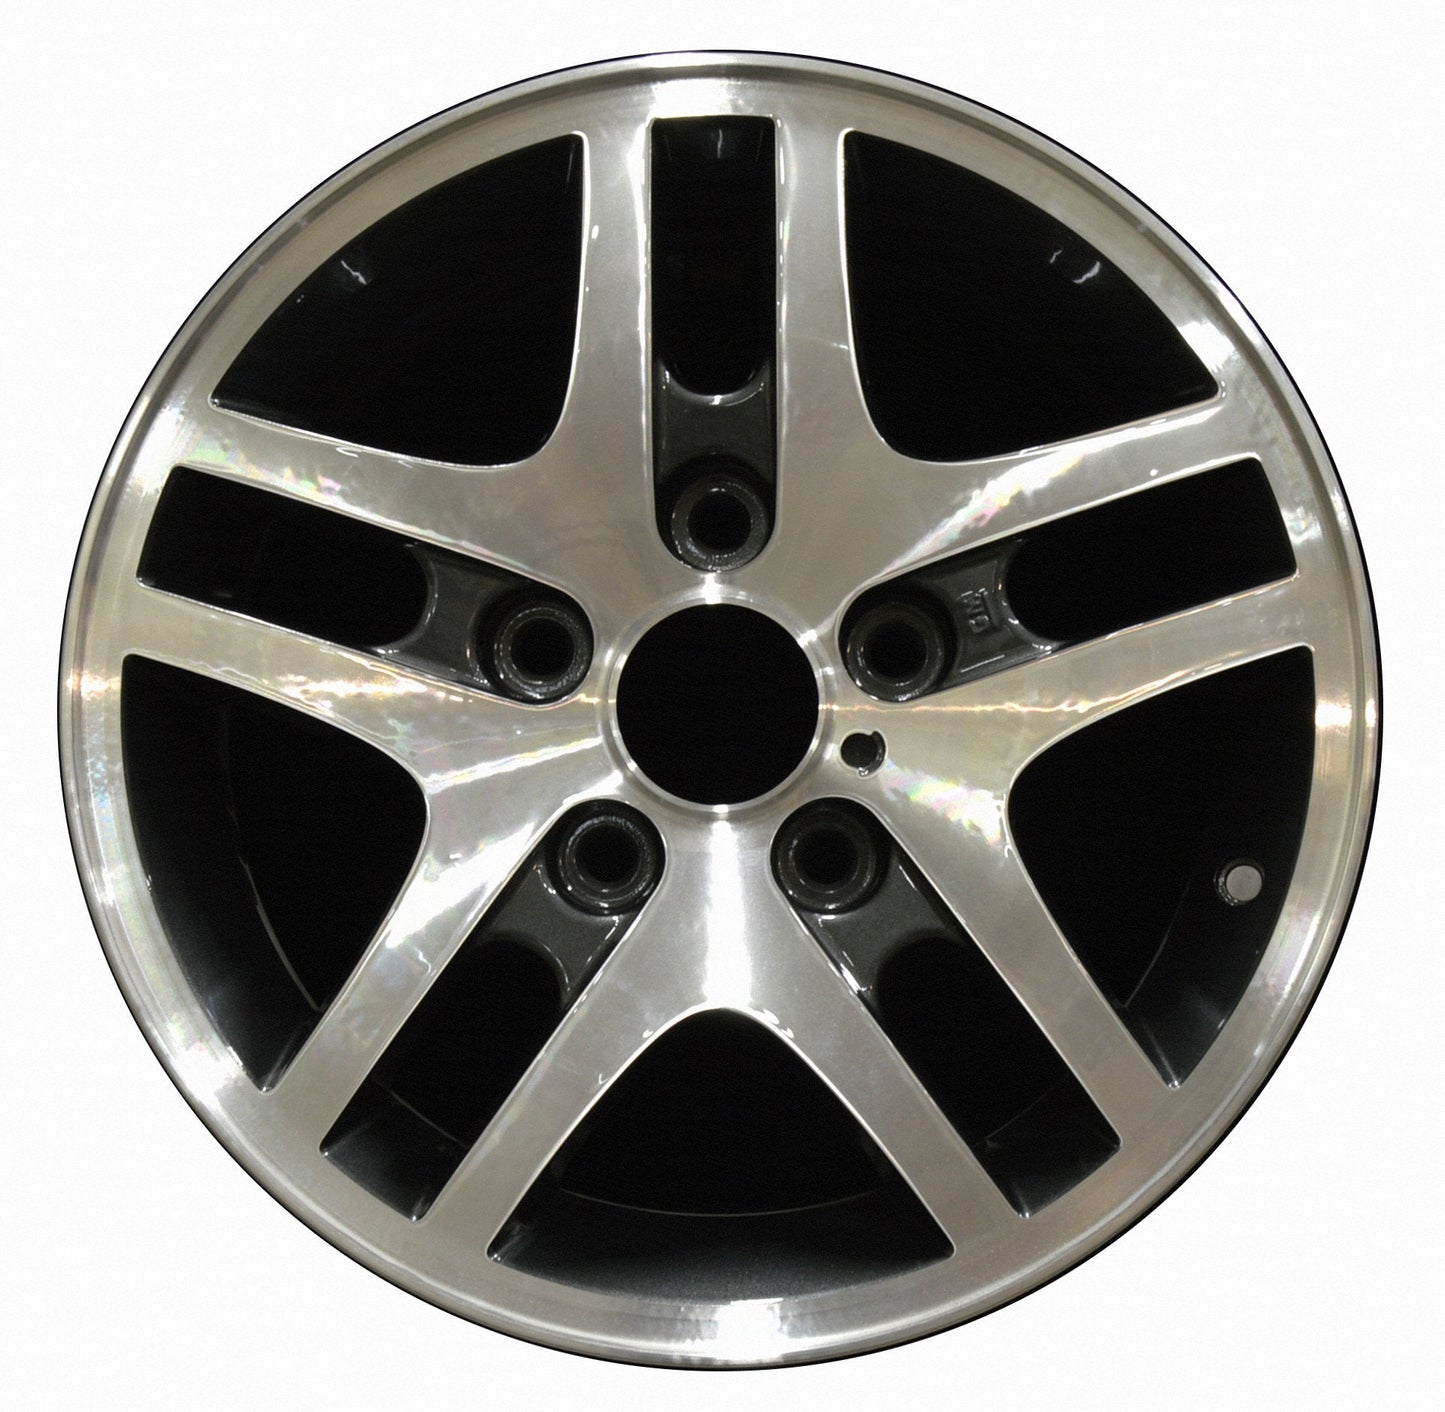 Chevrolet S10 Truck  2002, 2003, 2004 Factory OEM Car Wheel Size 15x7 Alloy WAO.5157.LC12.MA